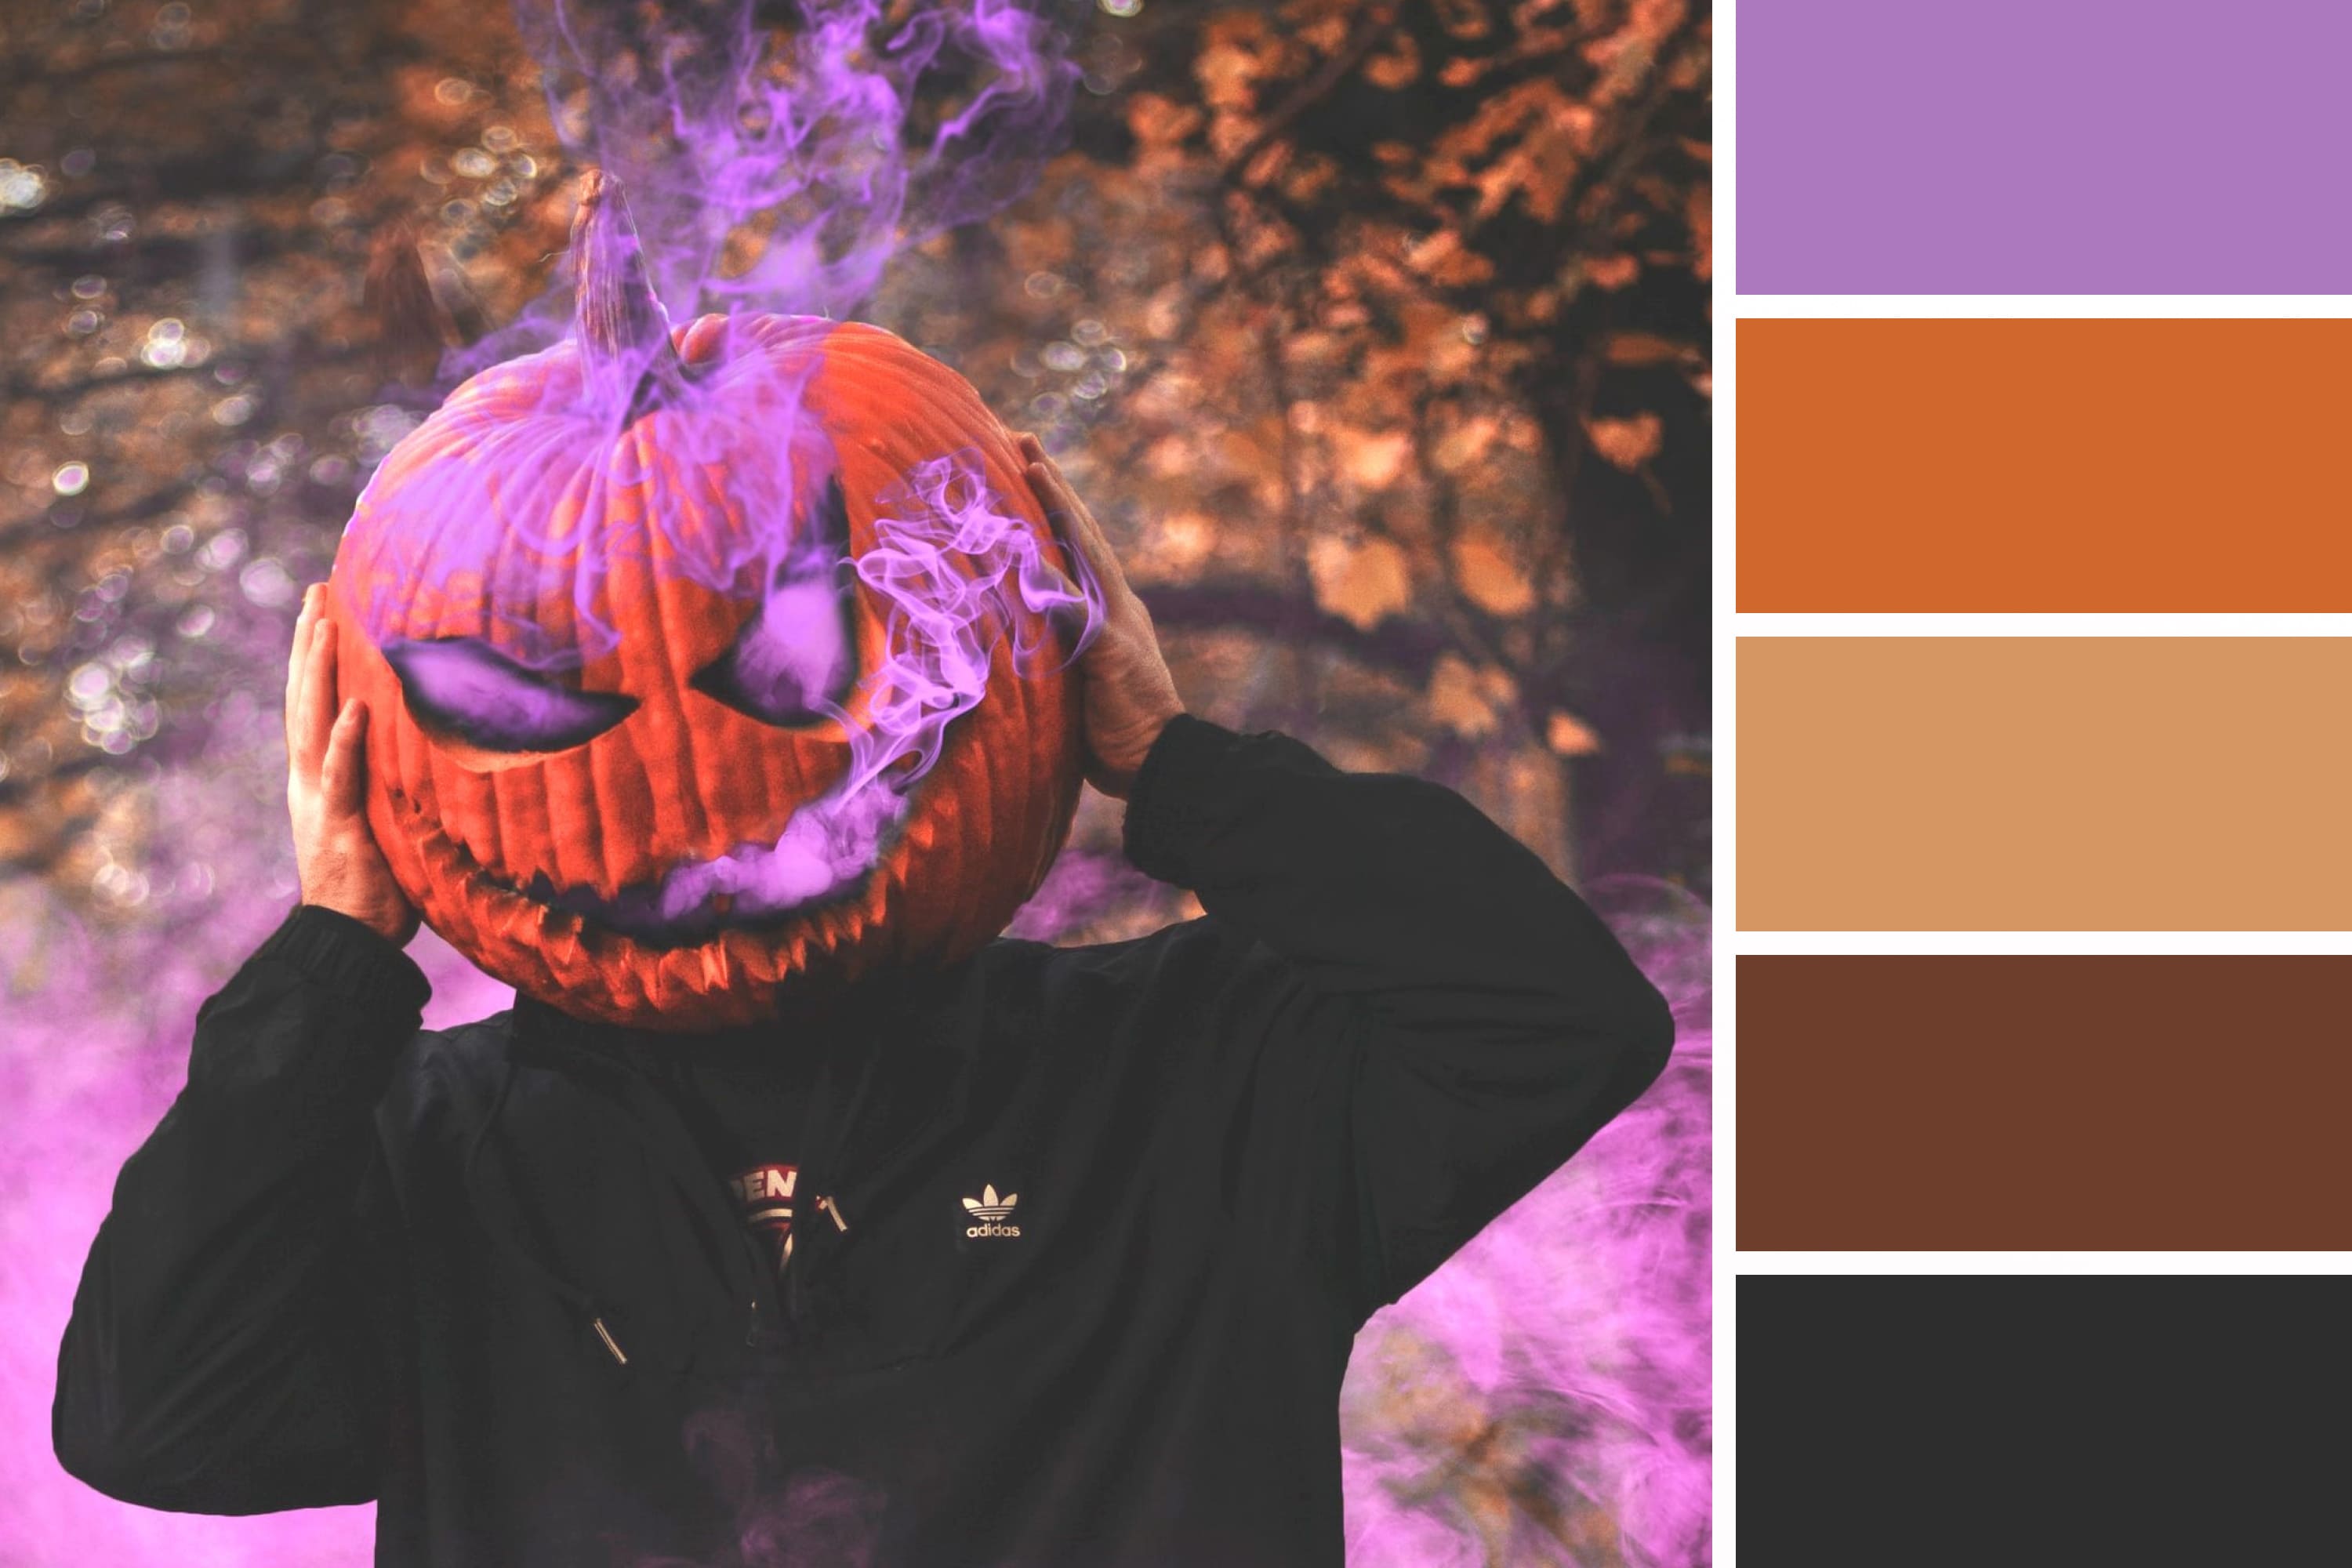 A guy in a black sweater with a big pumpkin instead of a head and purple smoke around.